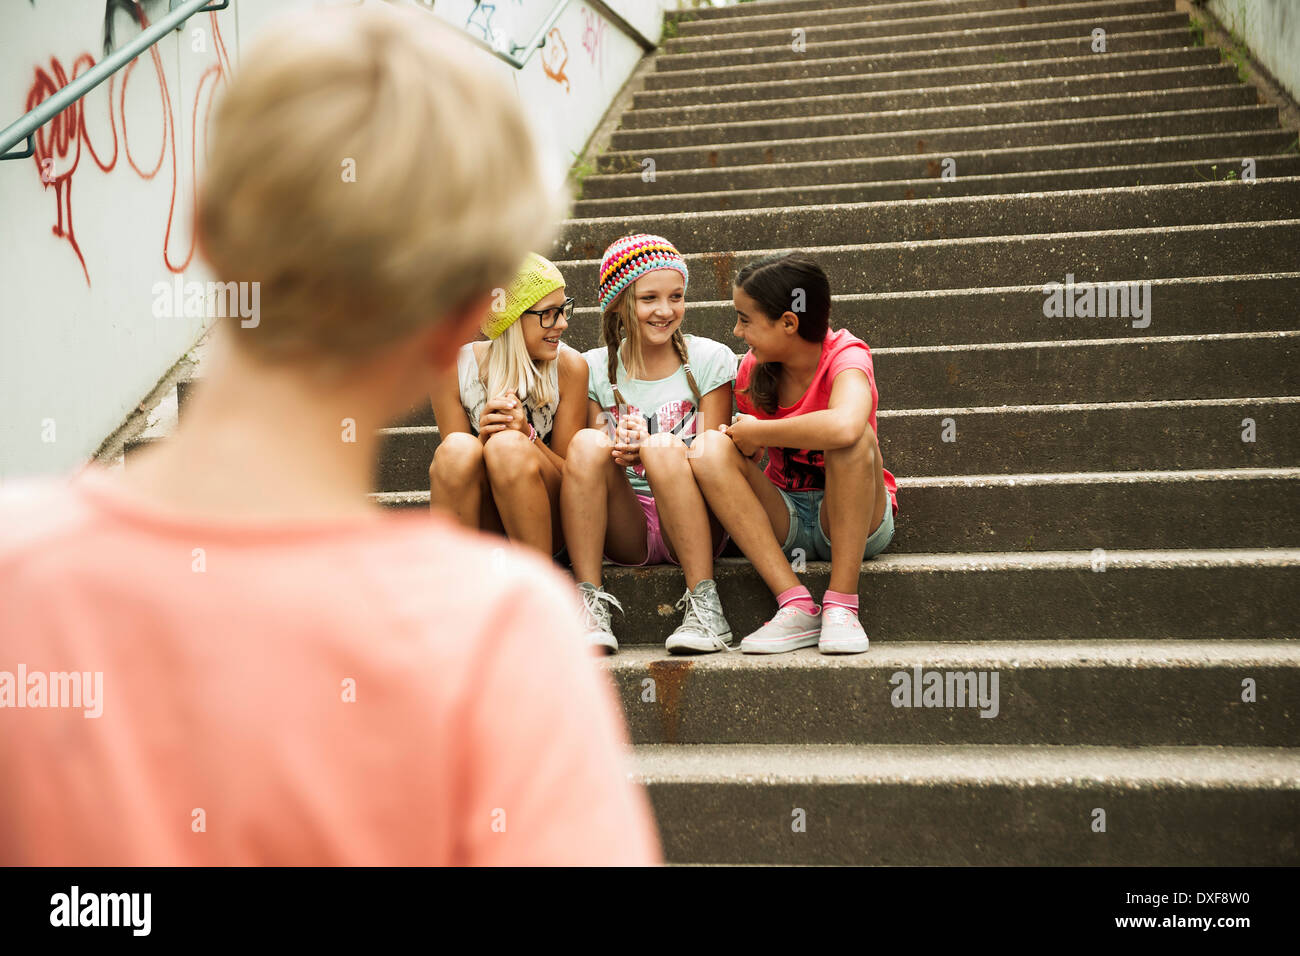 Backview of boy watching girls sitting on stairs outdoors, Germany Stock Photo